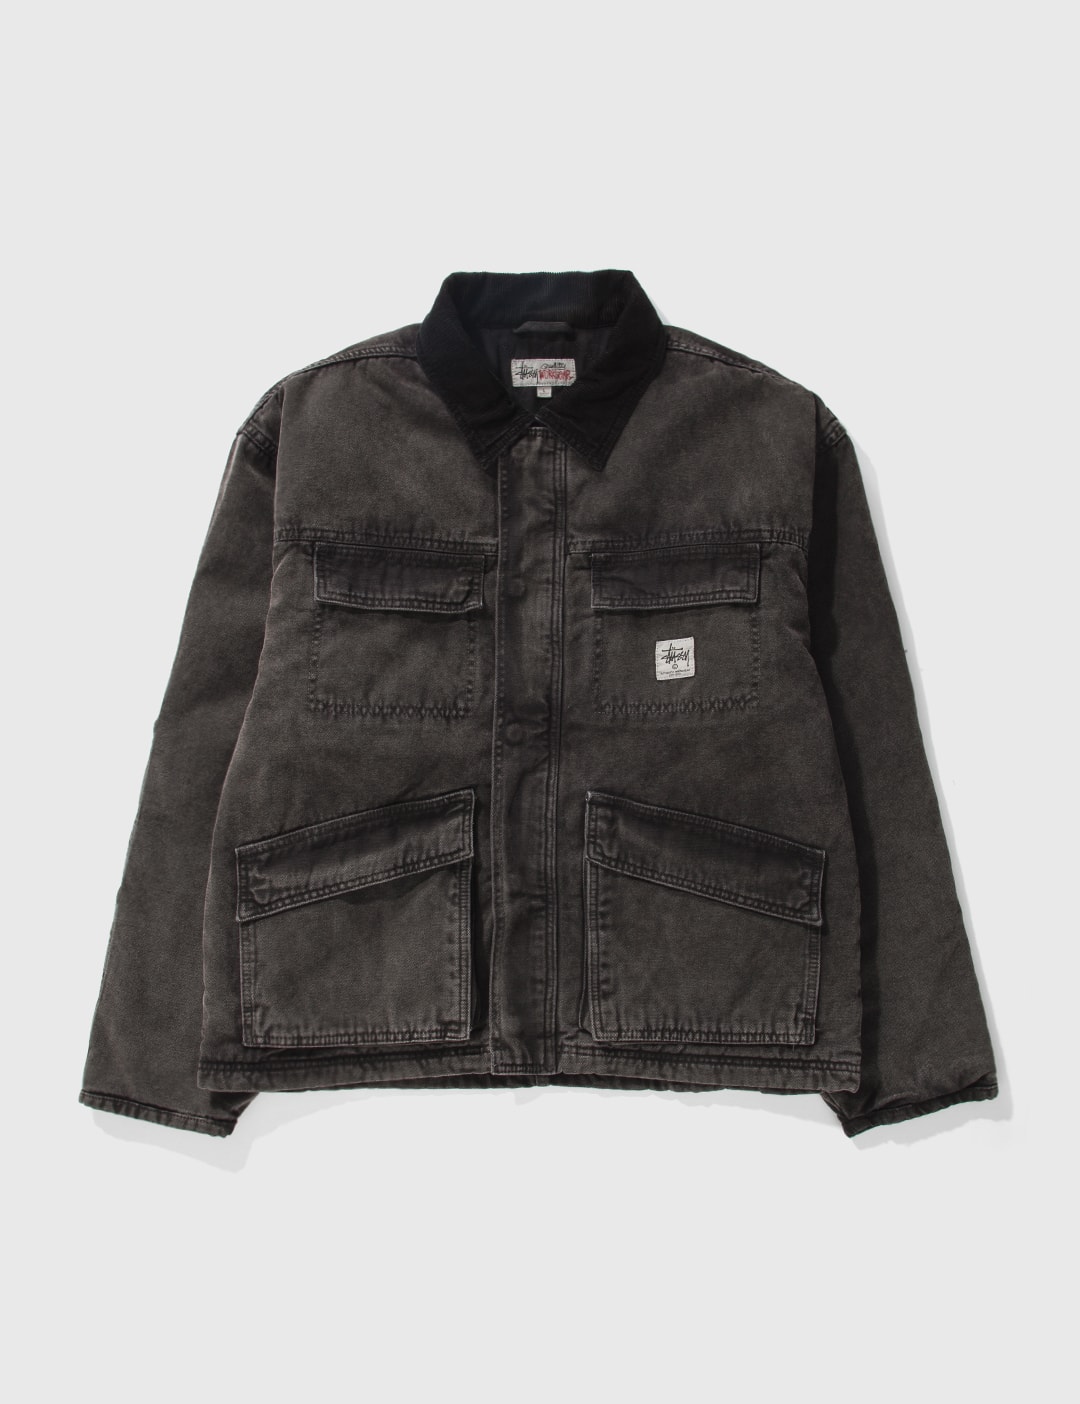 Stüssy - Washed Canvas Shop Jacket | HBX - Globally Curated Fashion and ...